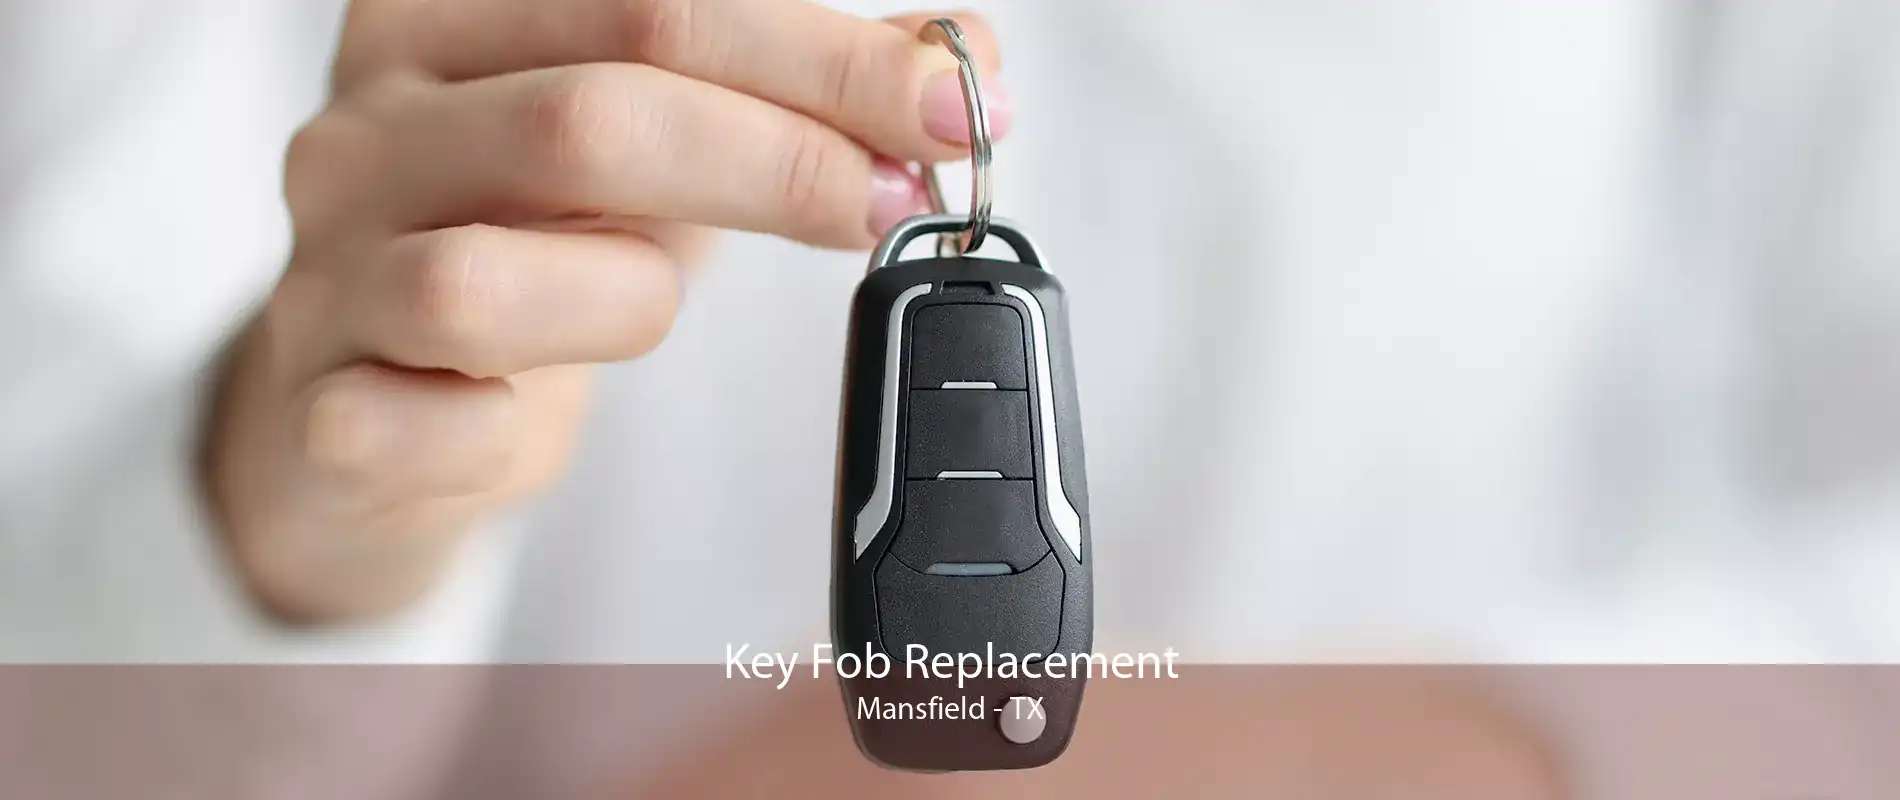 Key Fob Replacement Mansfield - TX